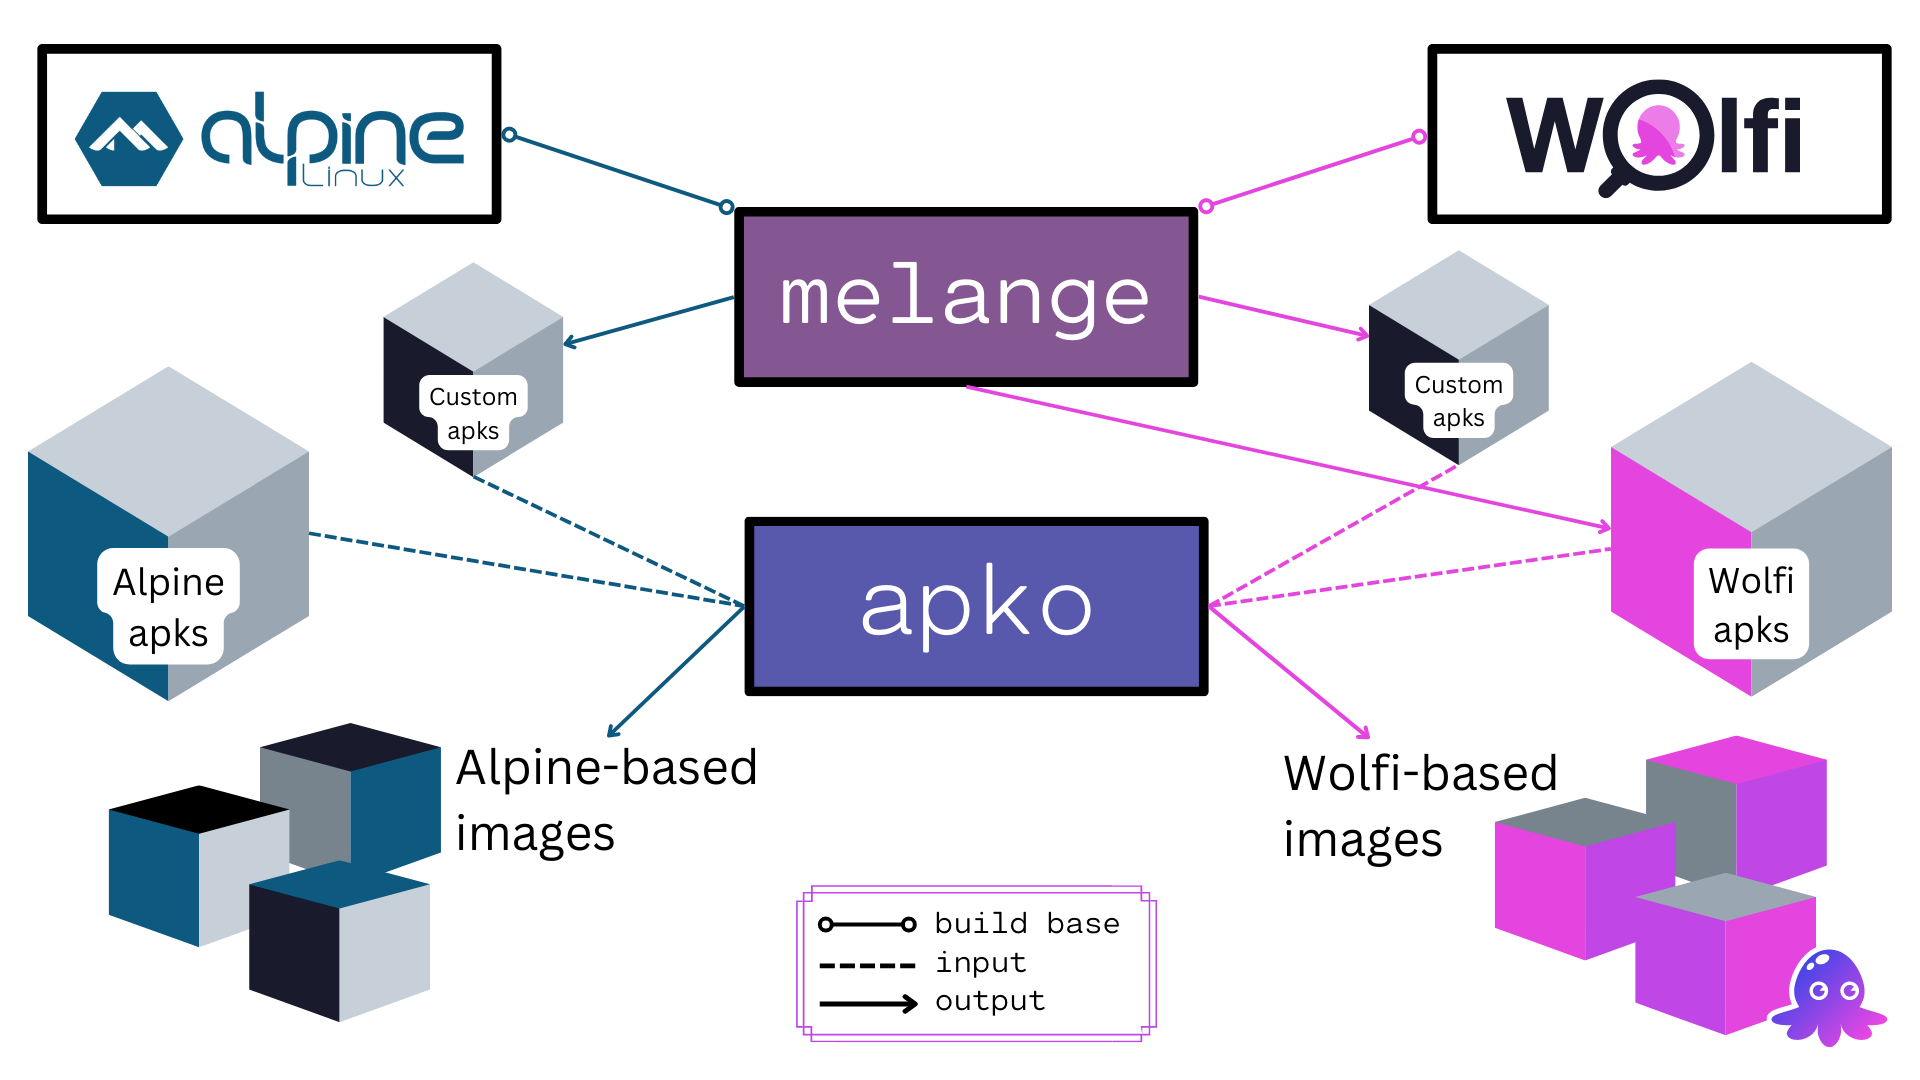 The diagram shows an overview of the apko and melange ecosystem and their relationships. melange apks can be used to compose both Alpine-based and Wolfi-based container images using apko.